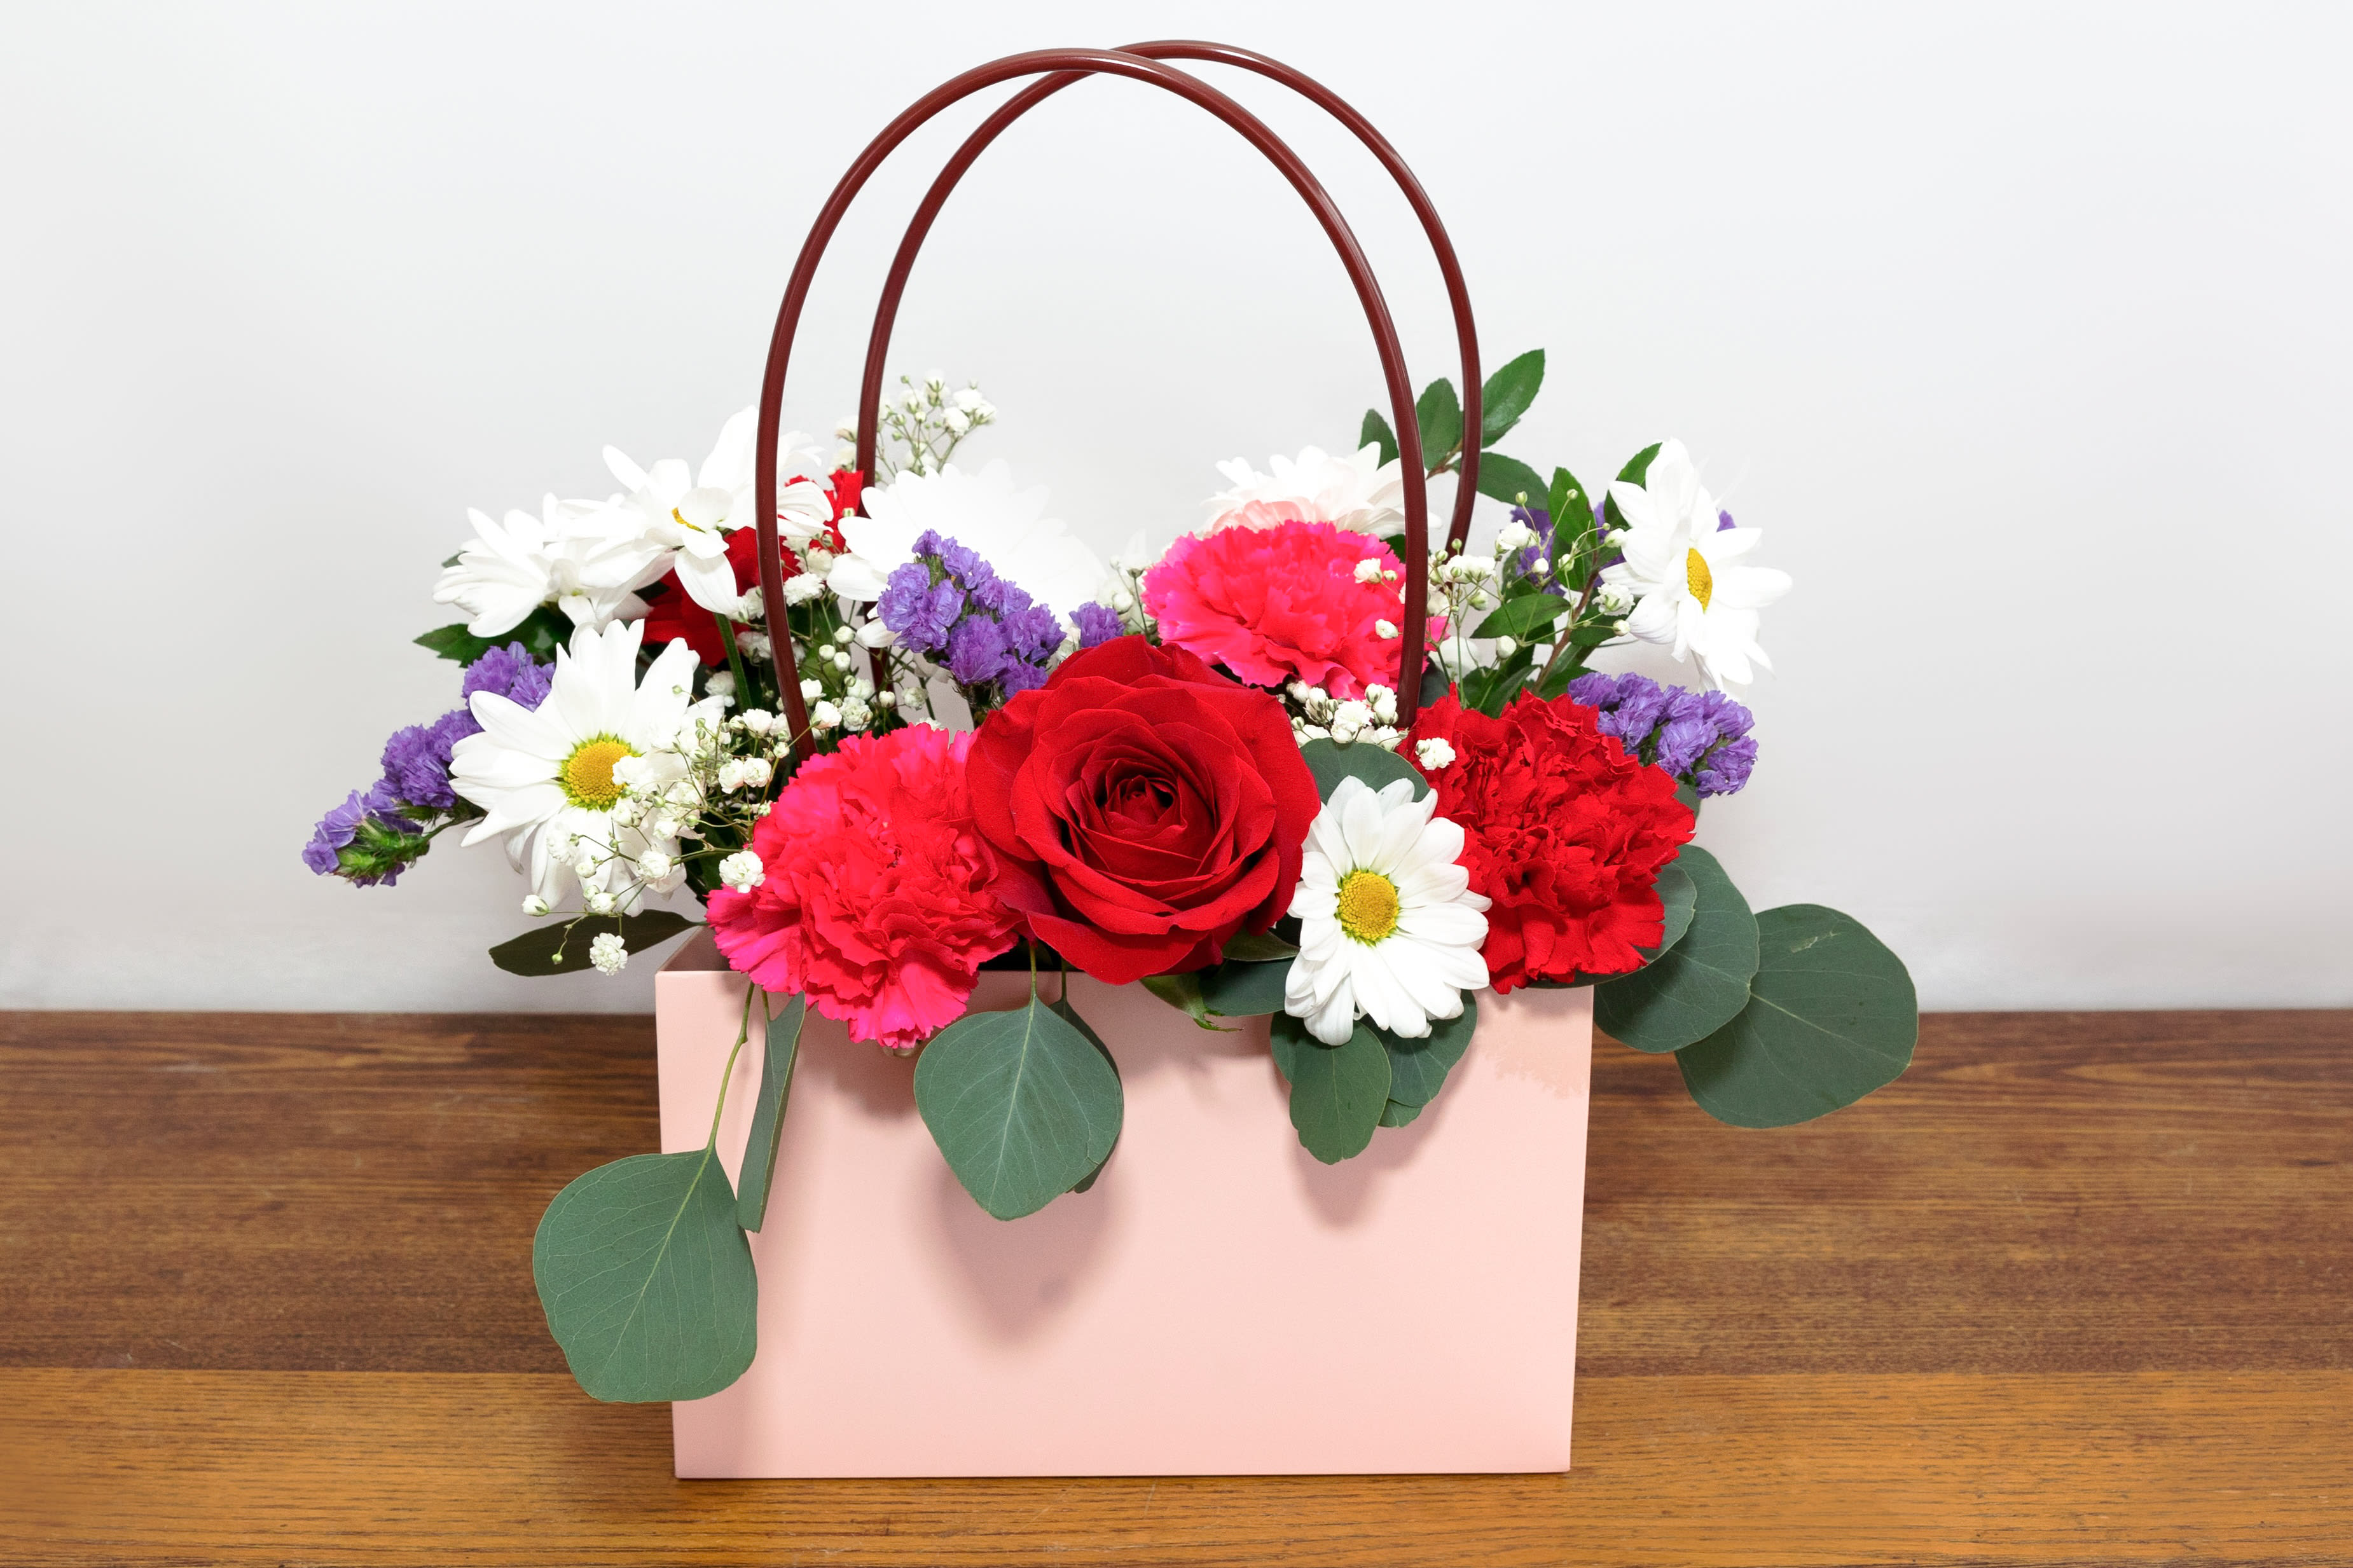 Blooming Floral Handbag in East Moline, IL